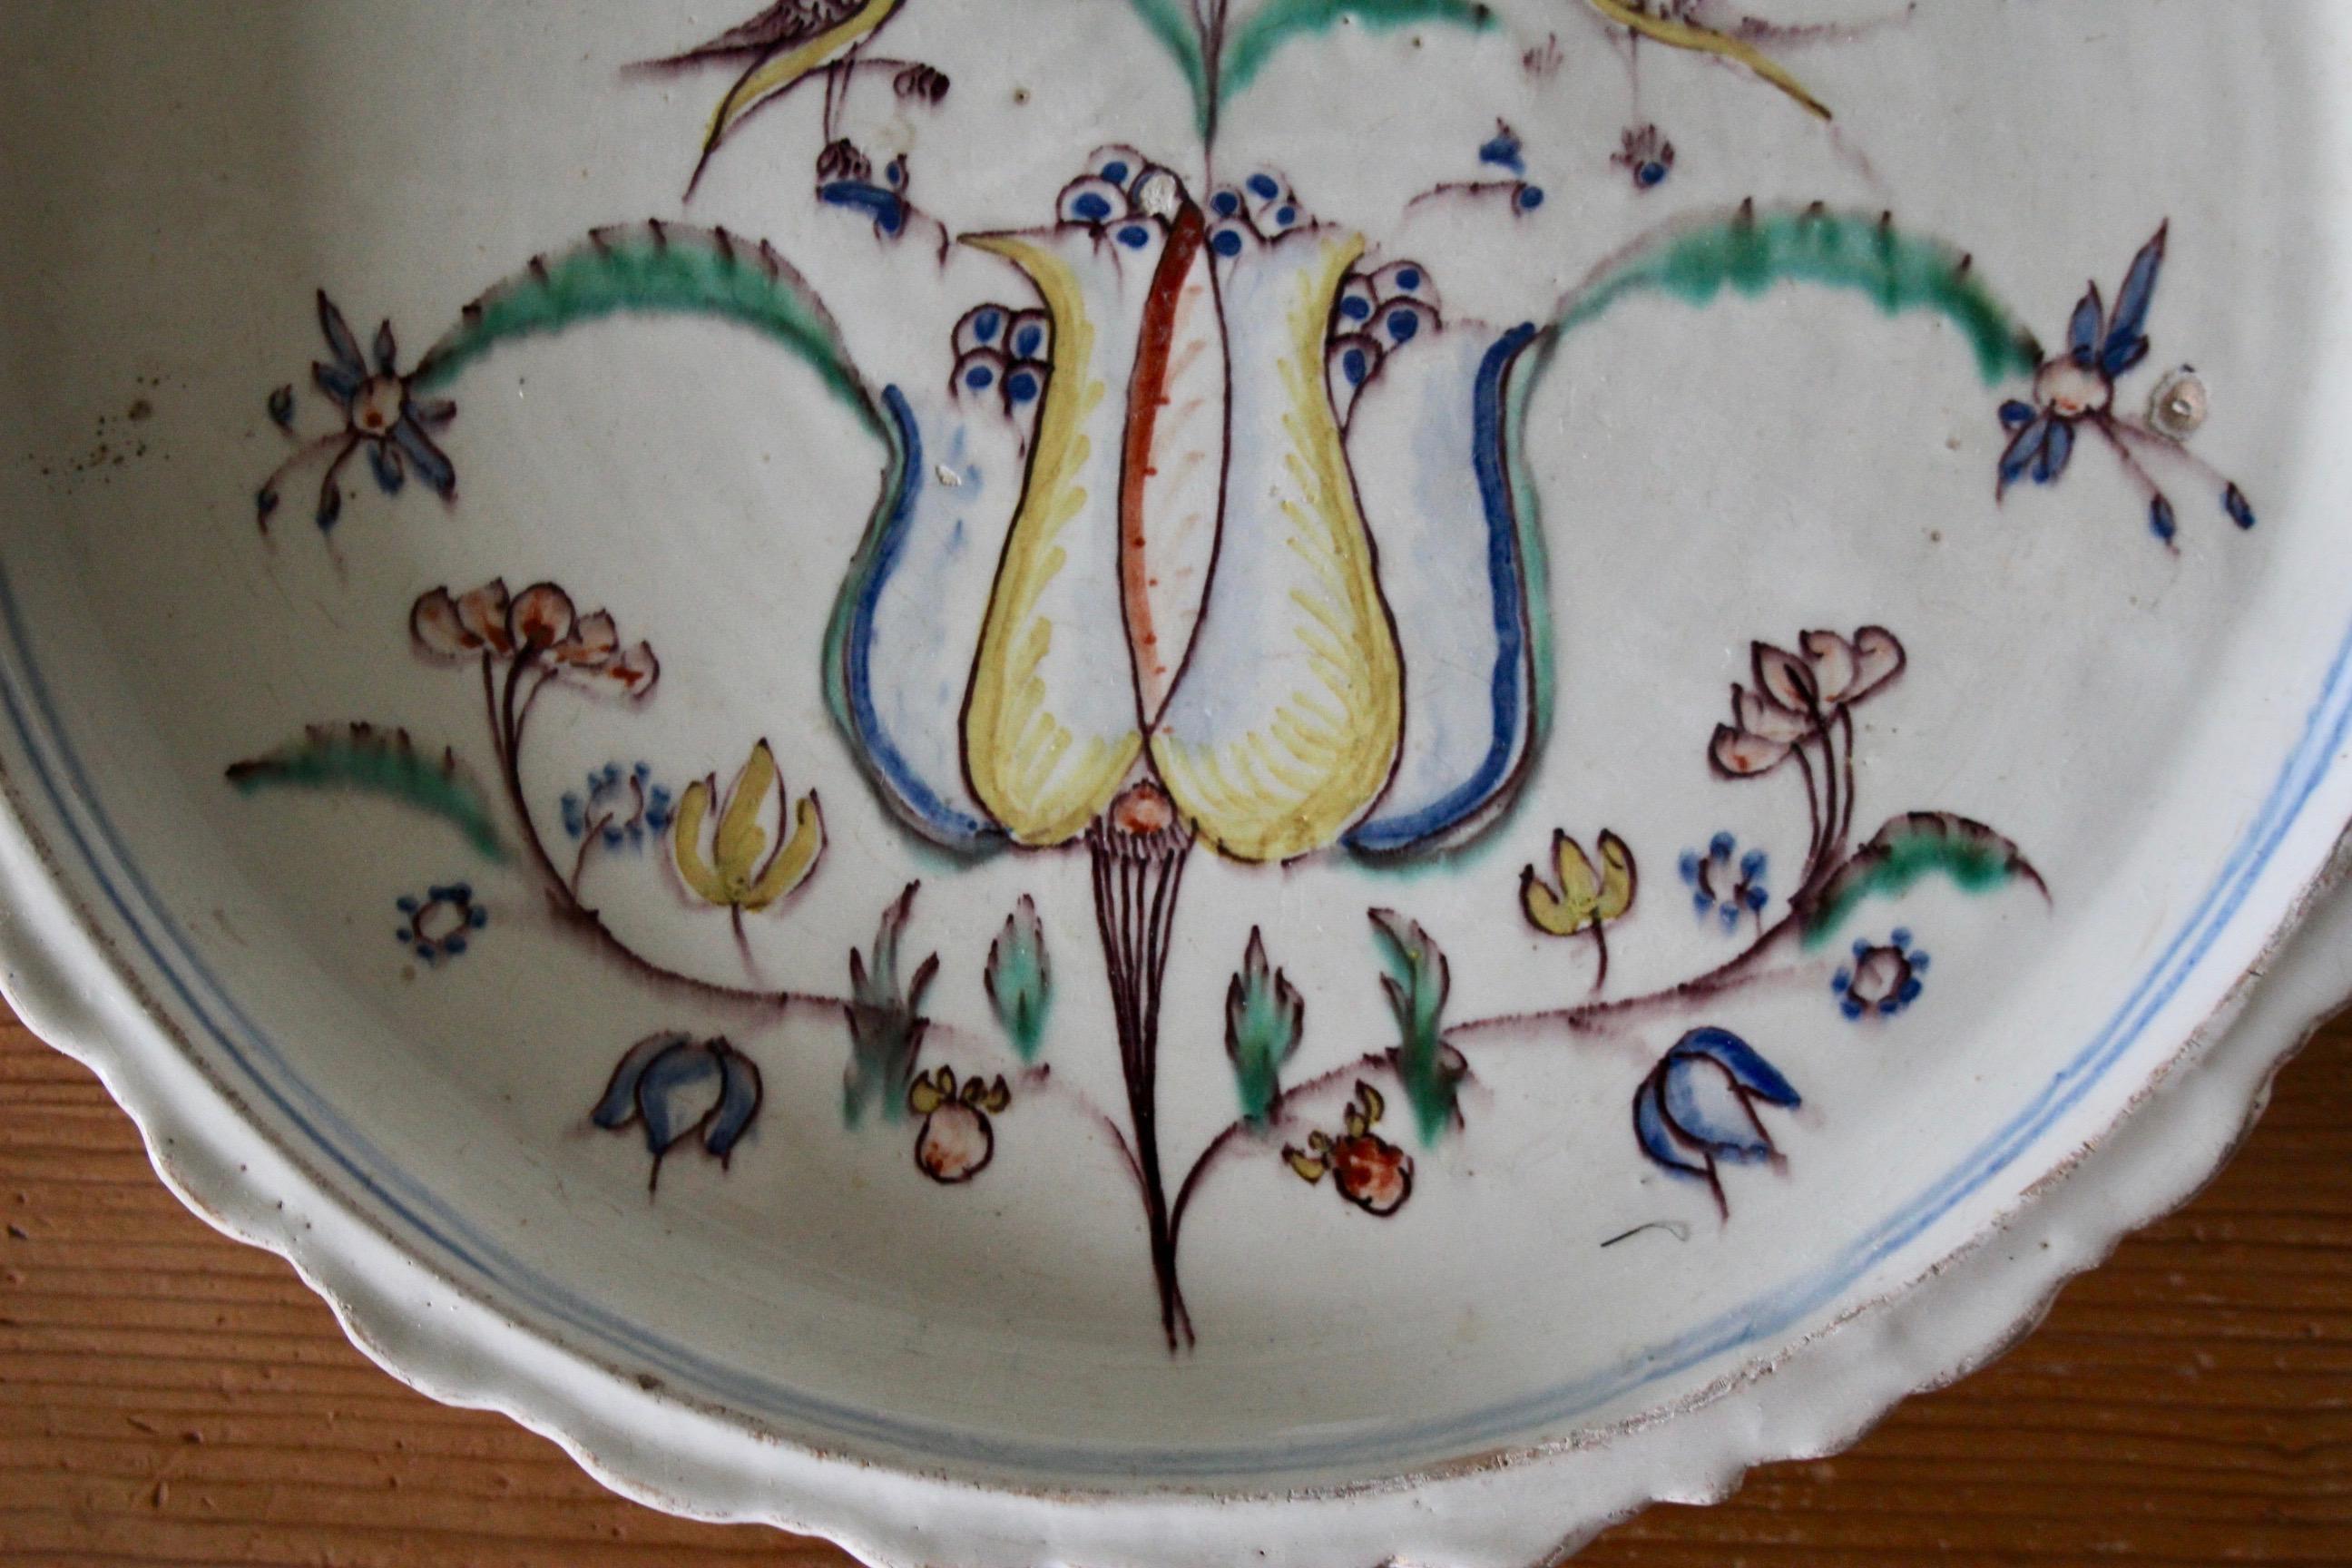 20th Century Swiss alp pottery  For Sale